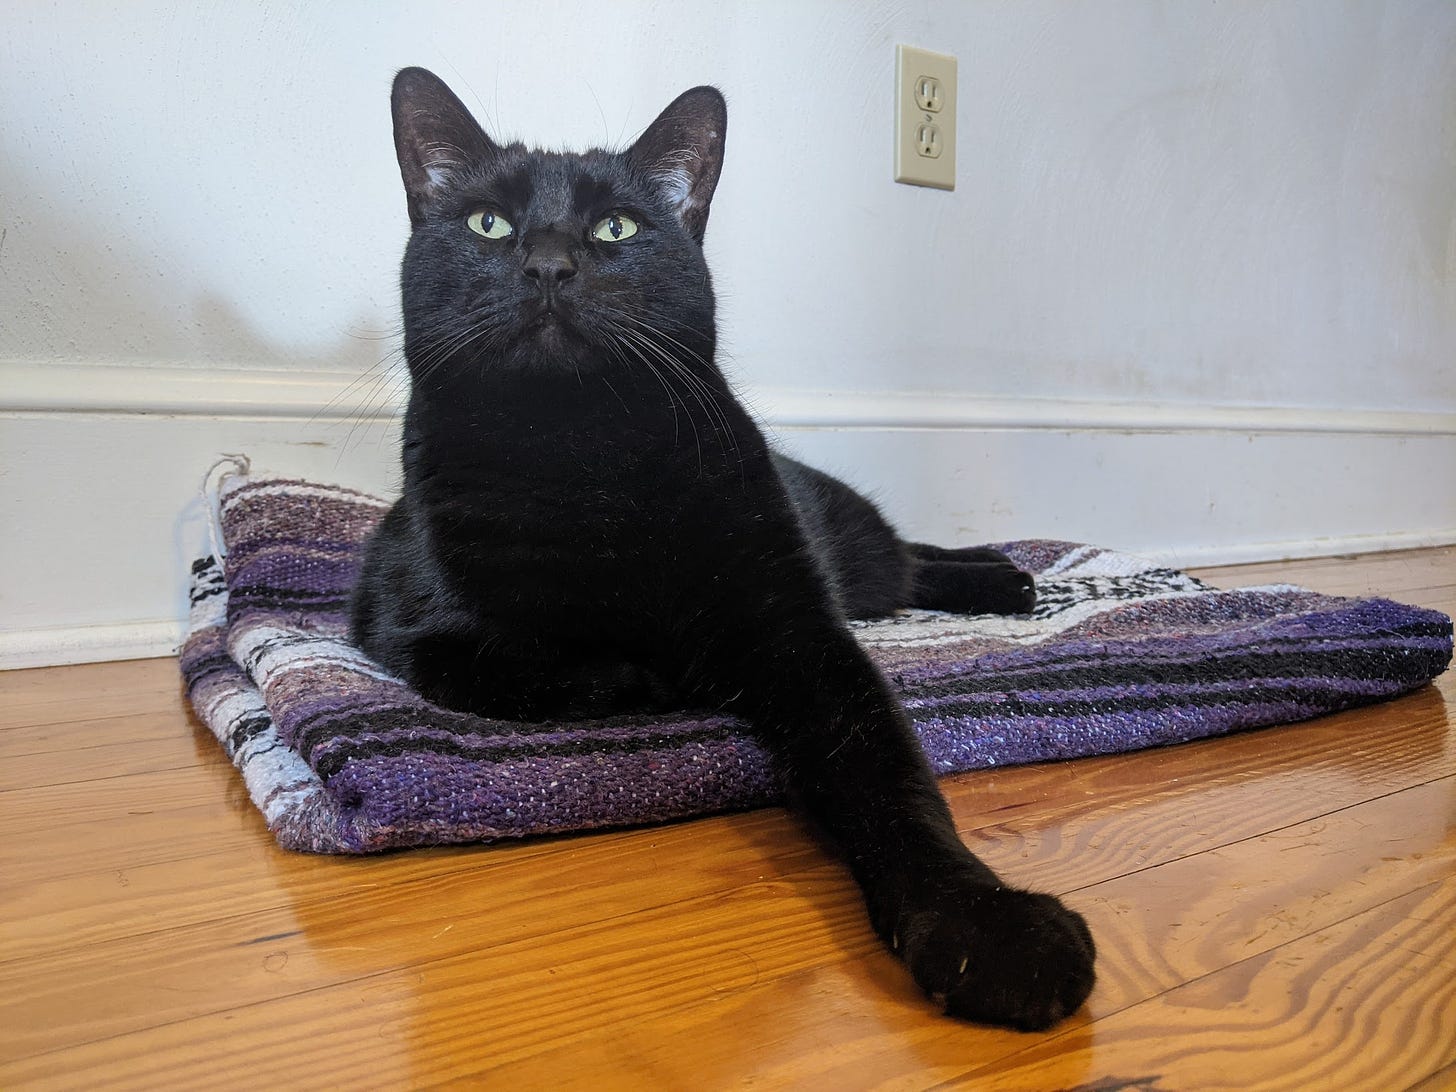 A black cat, lying on a purple, black, and white striped blanket folded on a wooden floor, reaches his left paw out and looks upward.